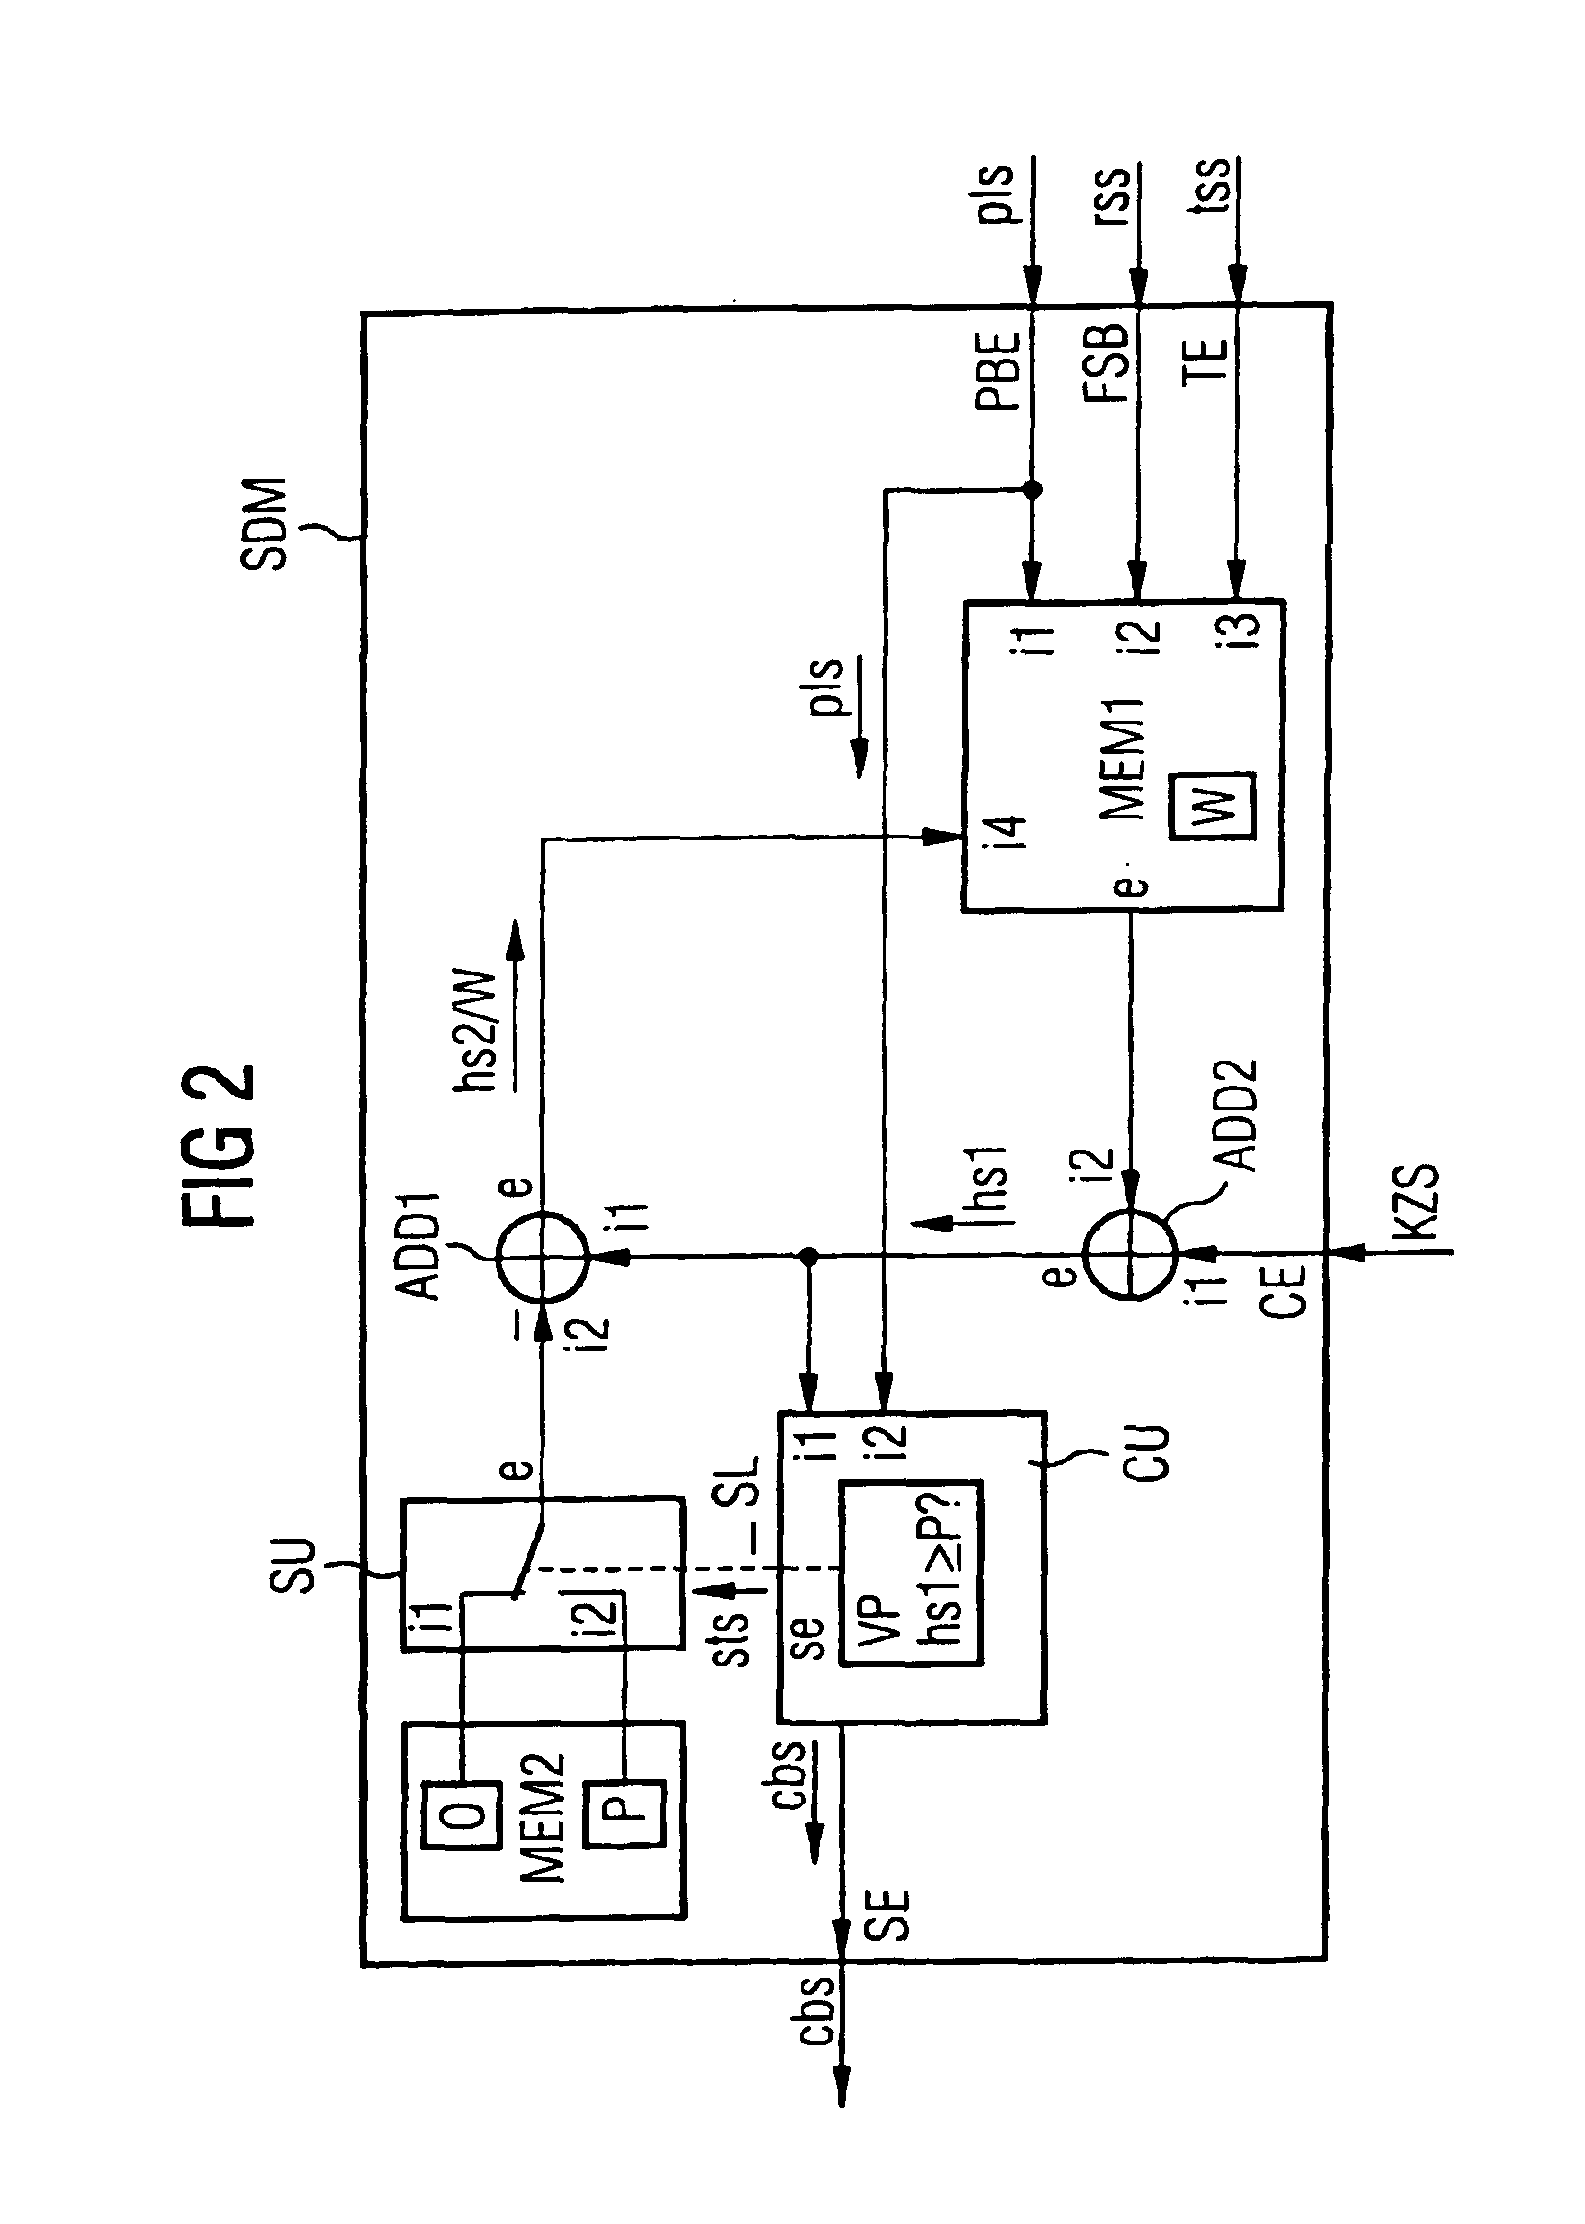 Method and system for transmitting at least one client signal within a server signal